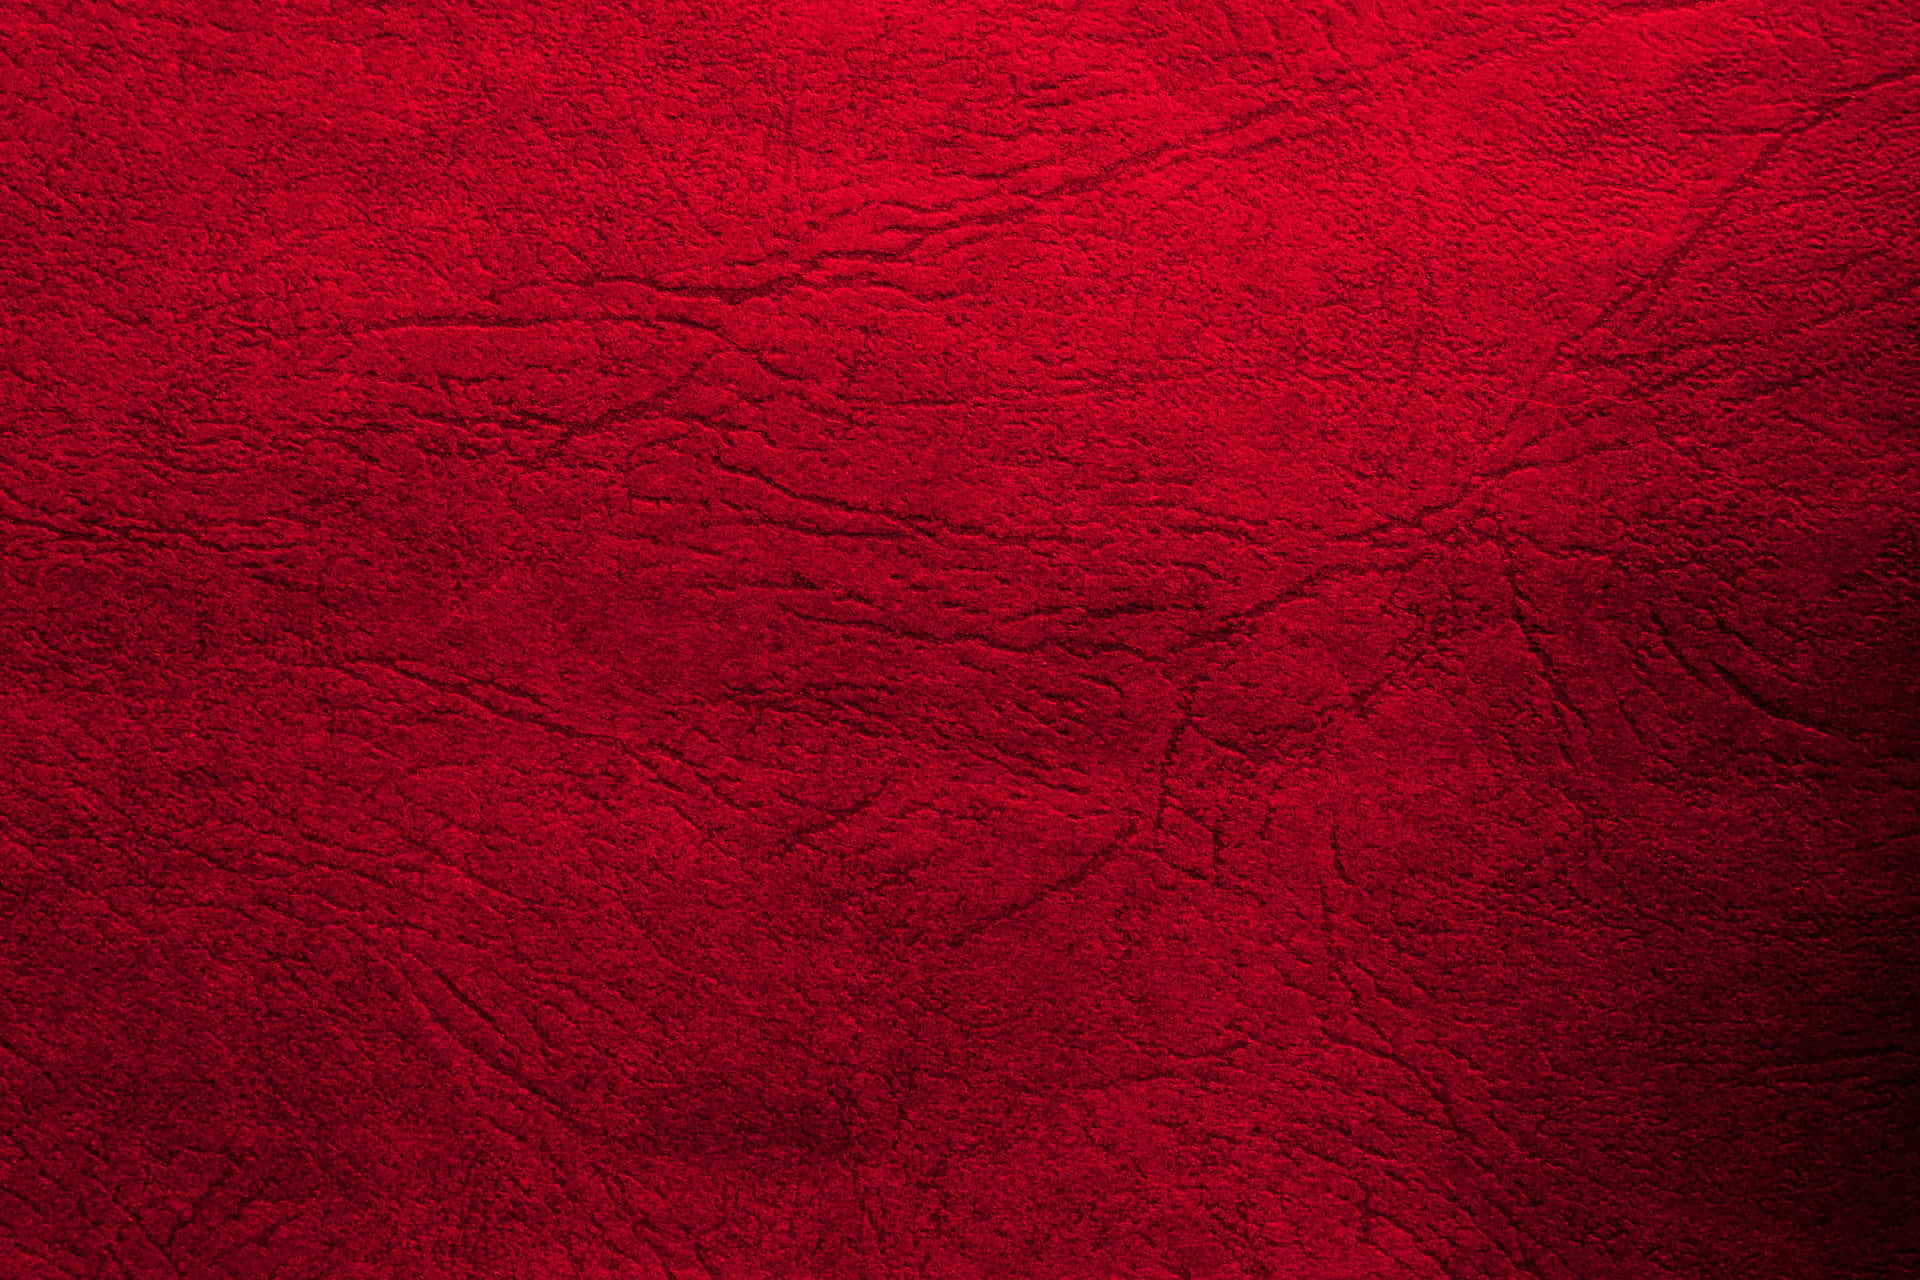 Red Texture Vibrant Red Leather Picture